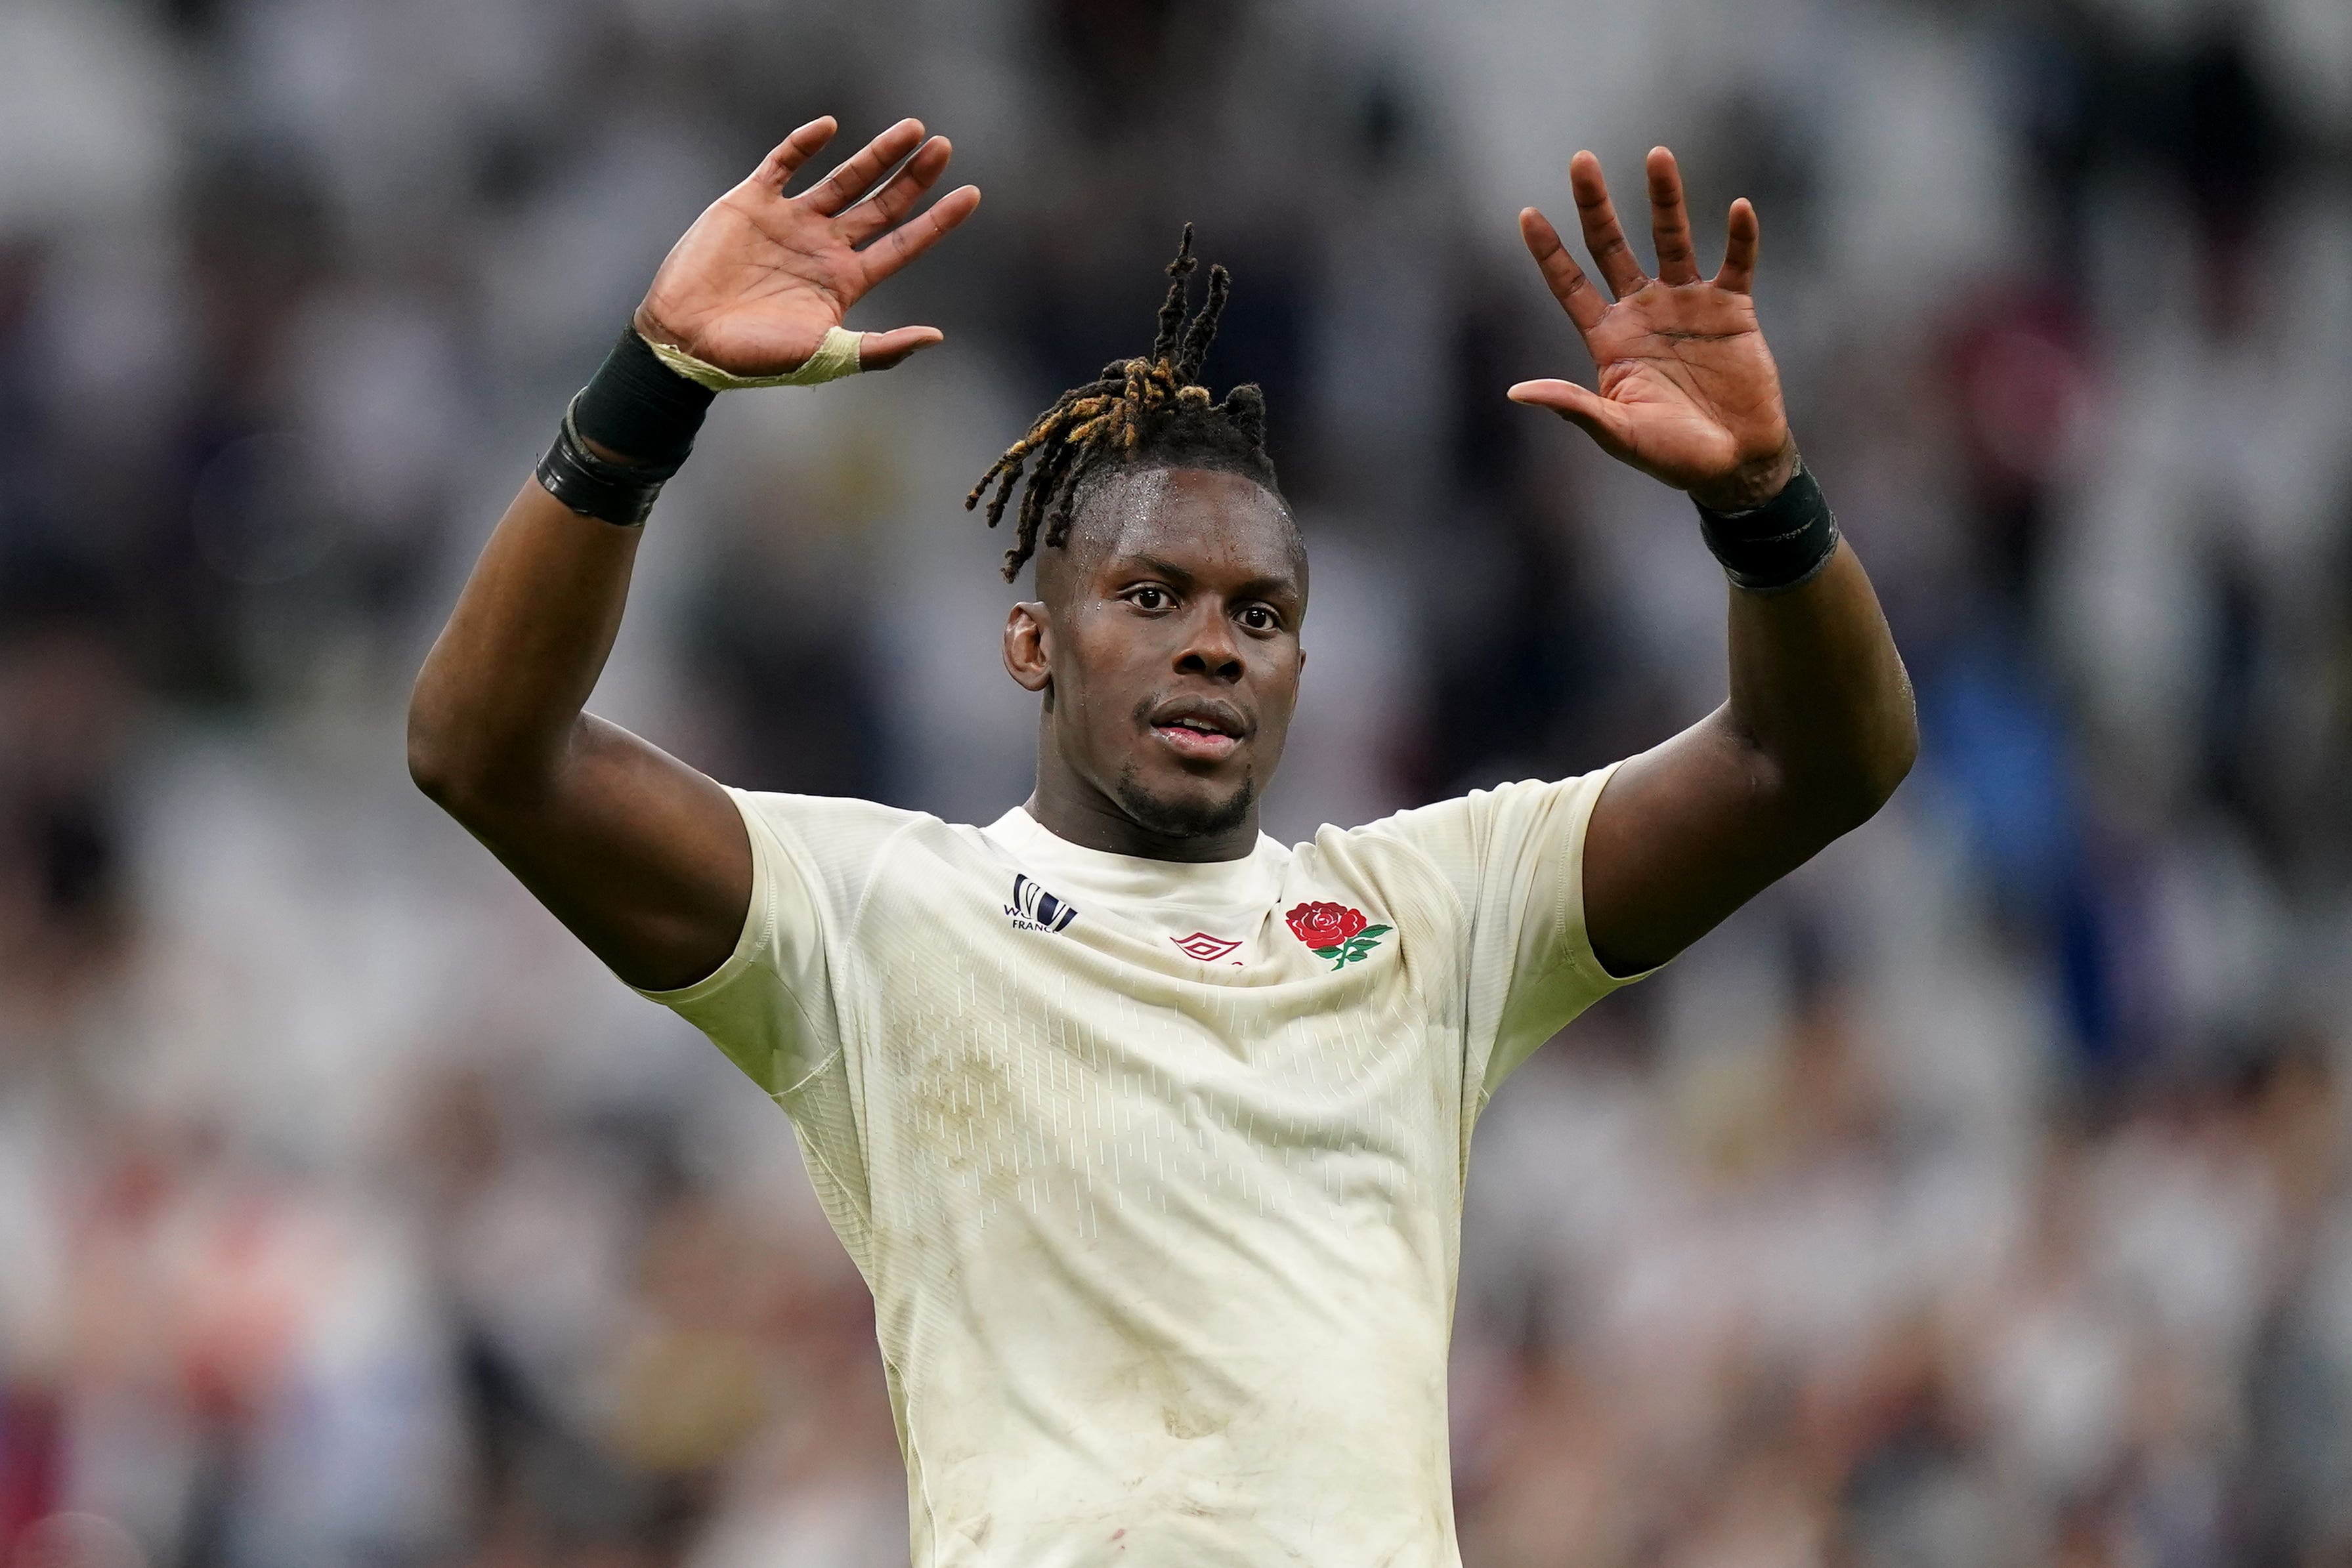 Maro Itoje believes England can dethrone South Africa on Saturday (Mike Egerton/PA)